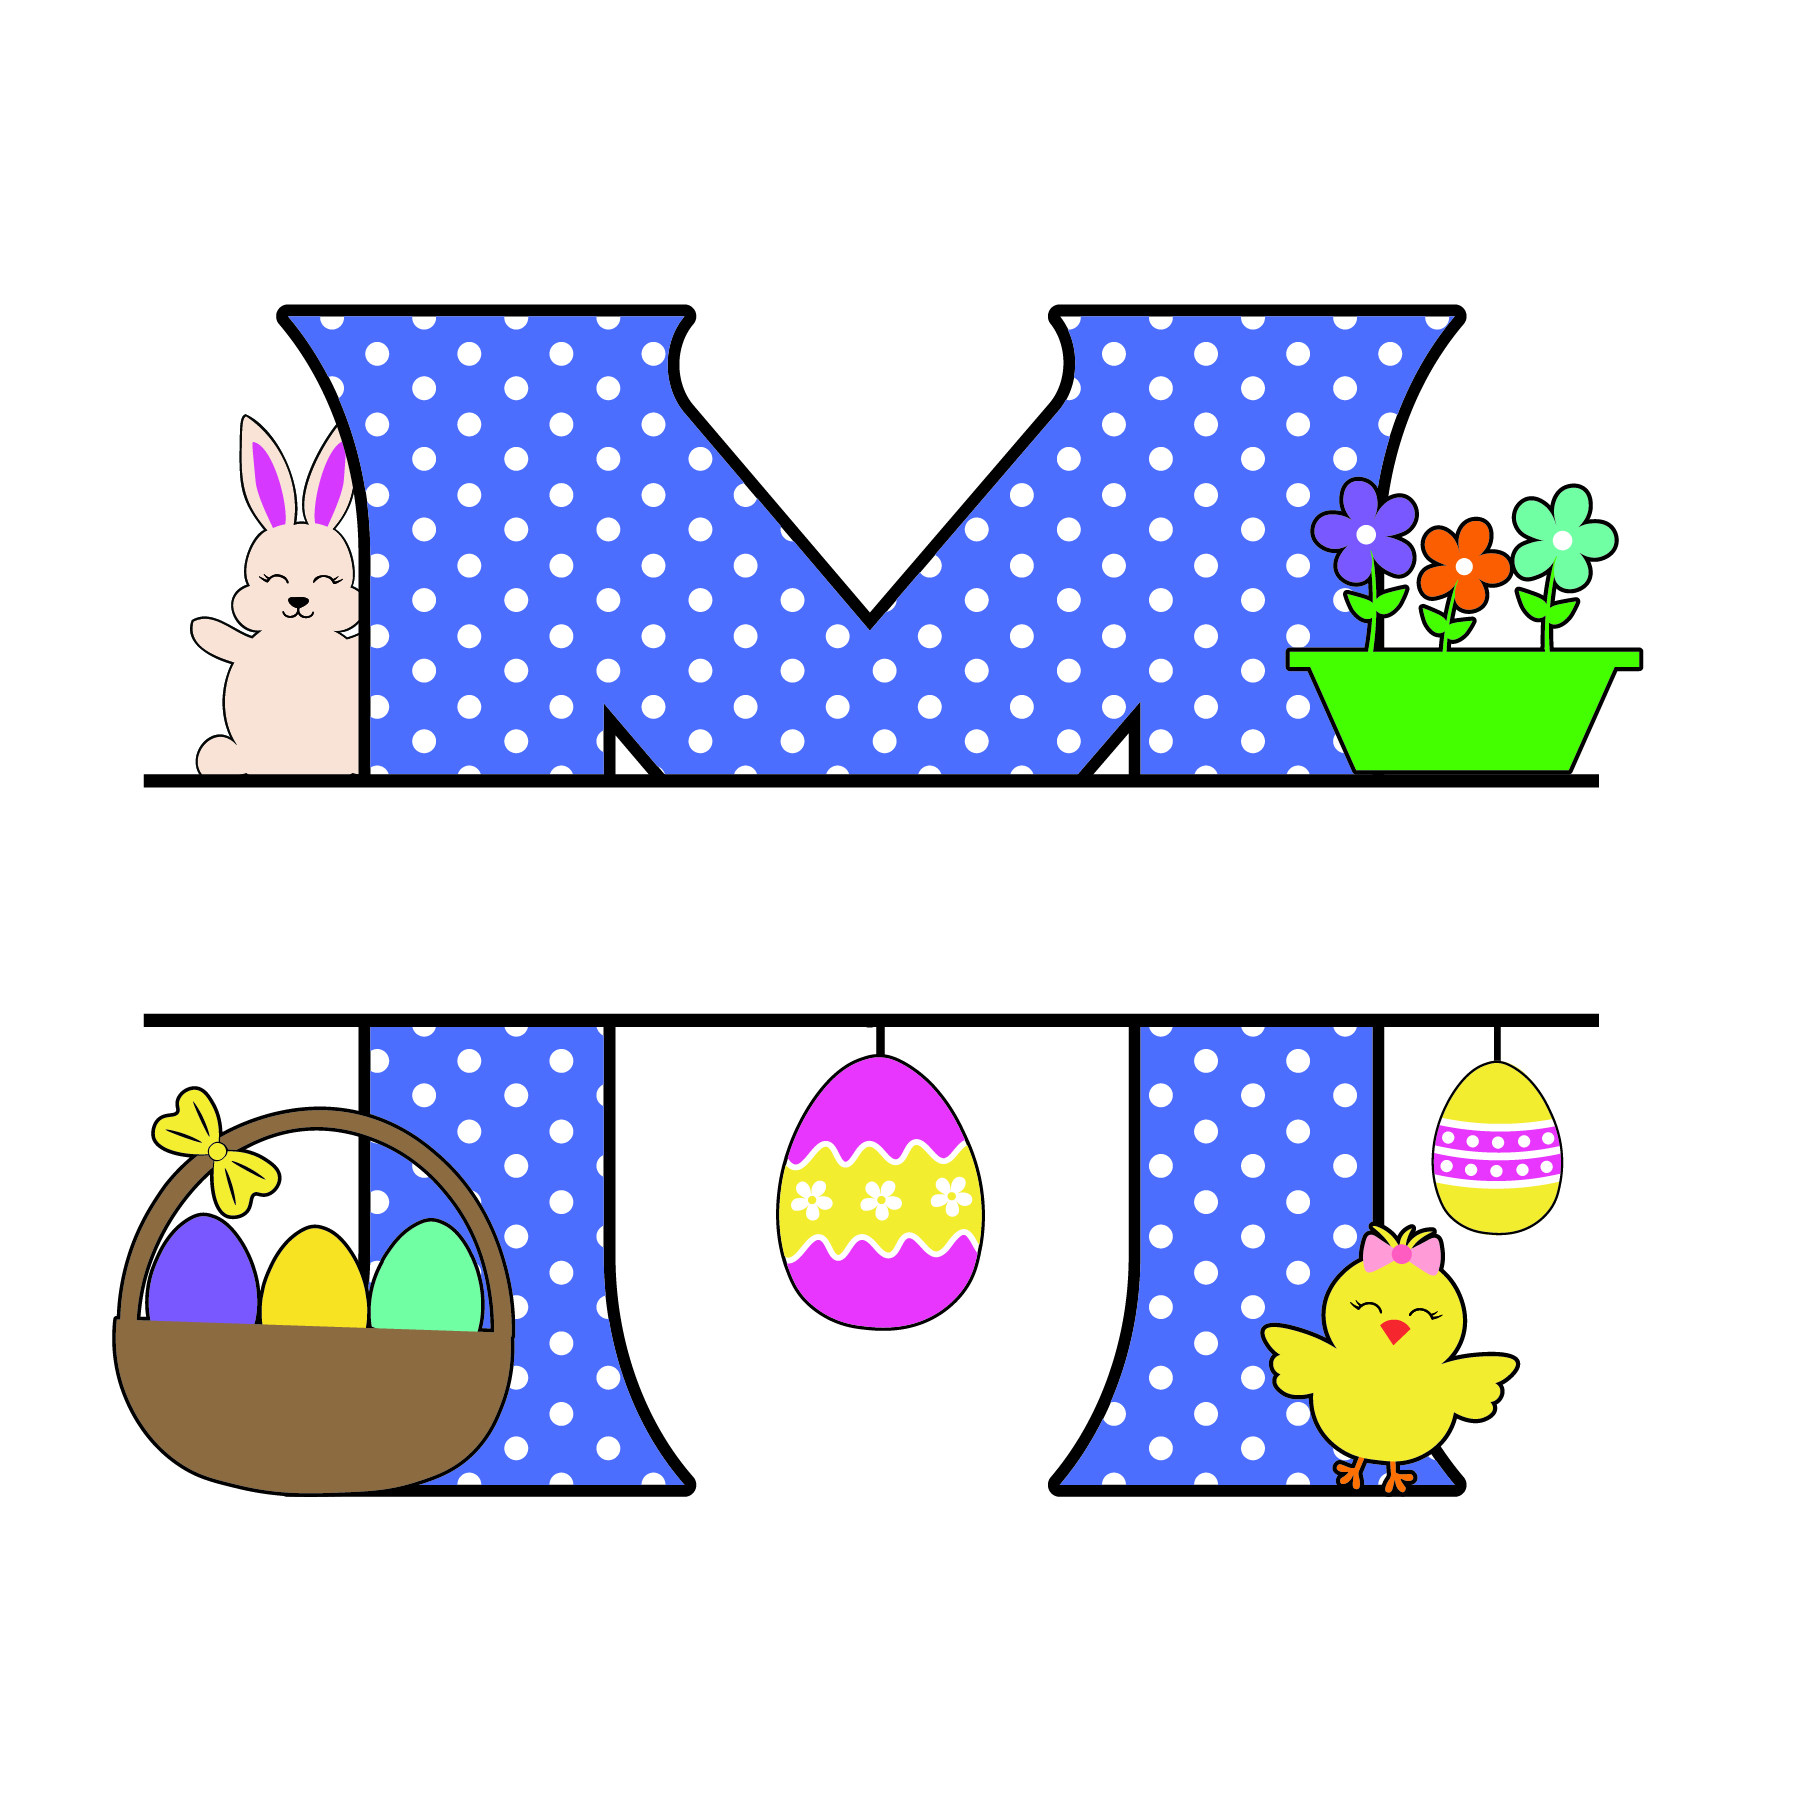 m letter free easter monogram bunny egg basket chicken clipart alphabet letter split customize or personalize stencil template to print or download vector svg laser vinyl circuit silhouette.